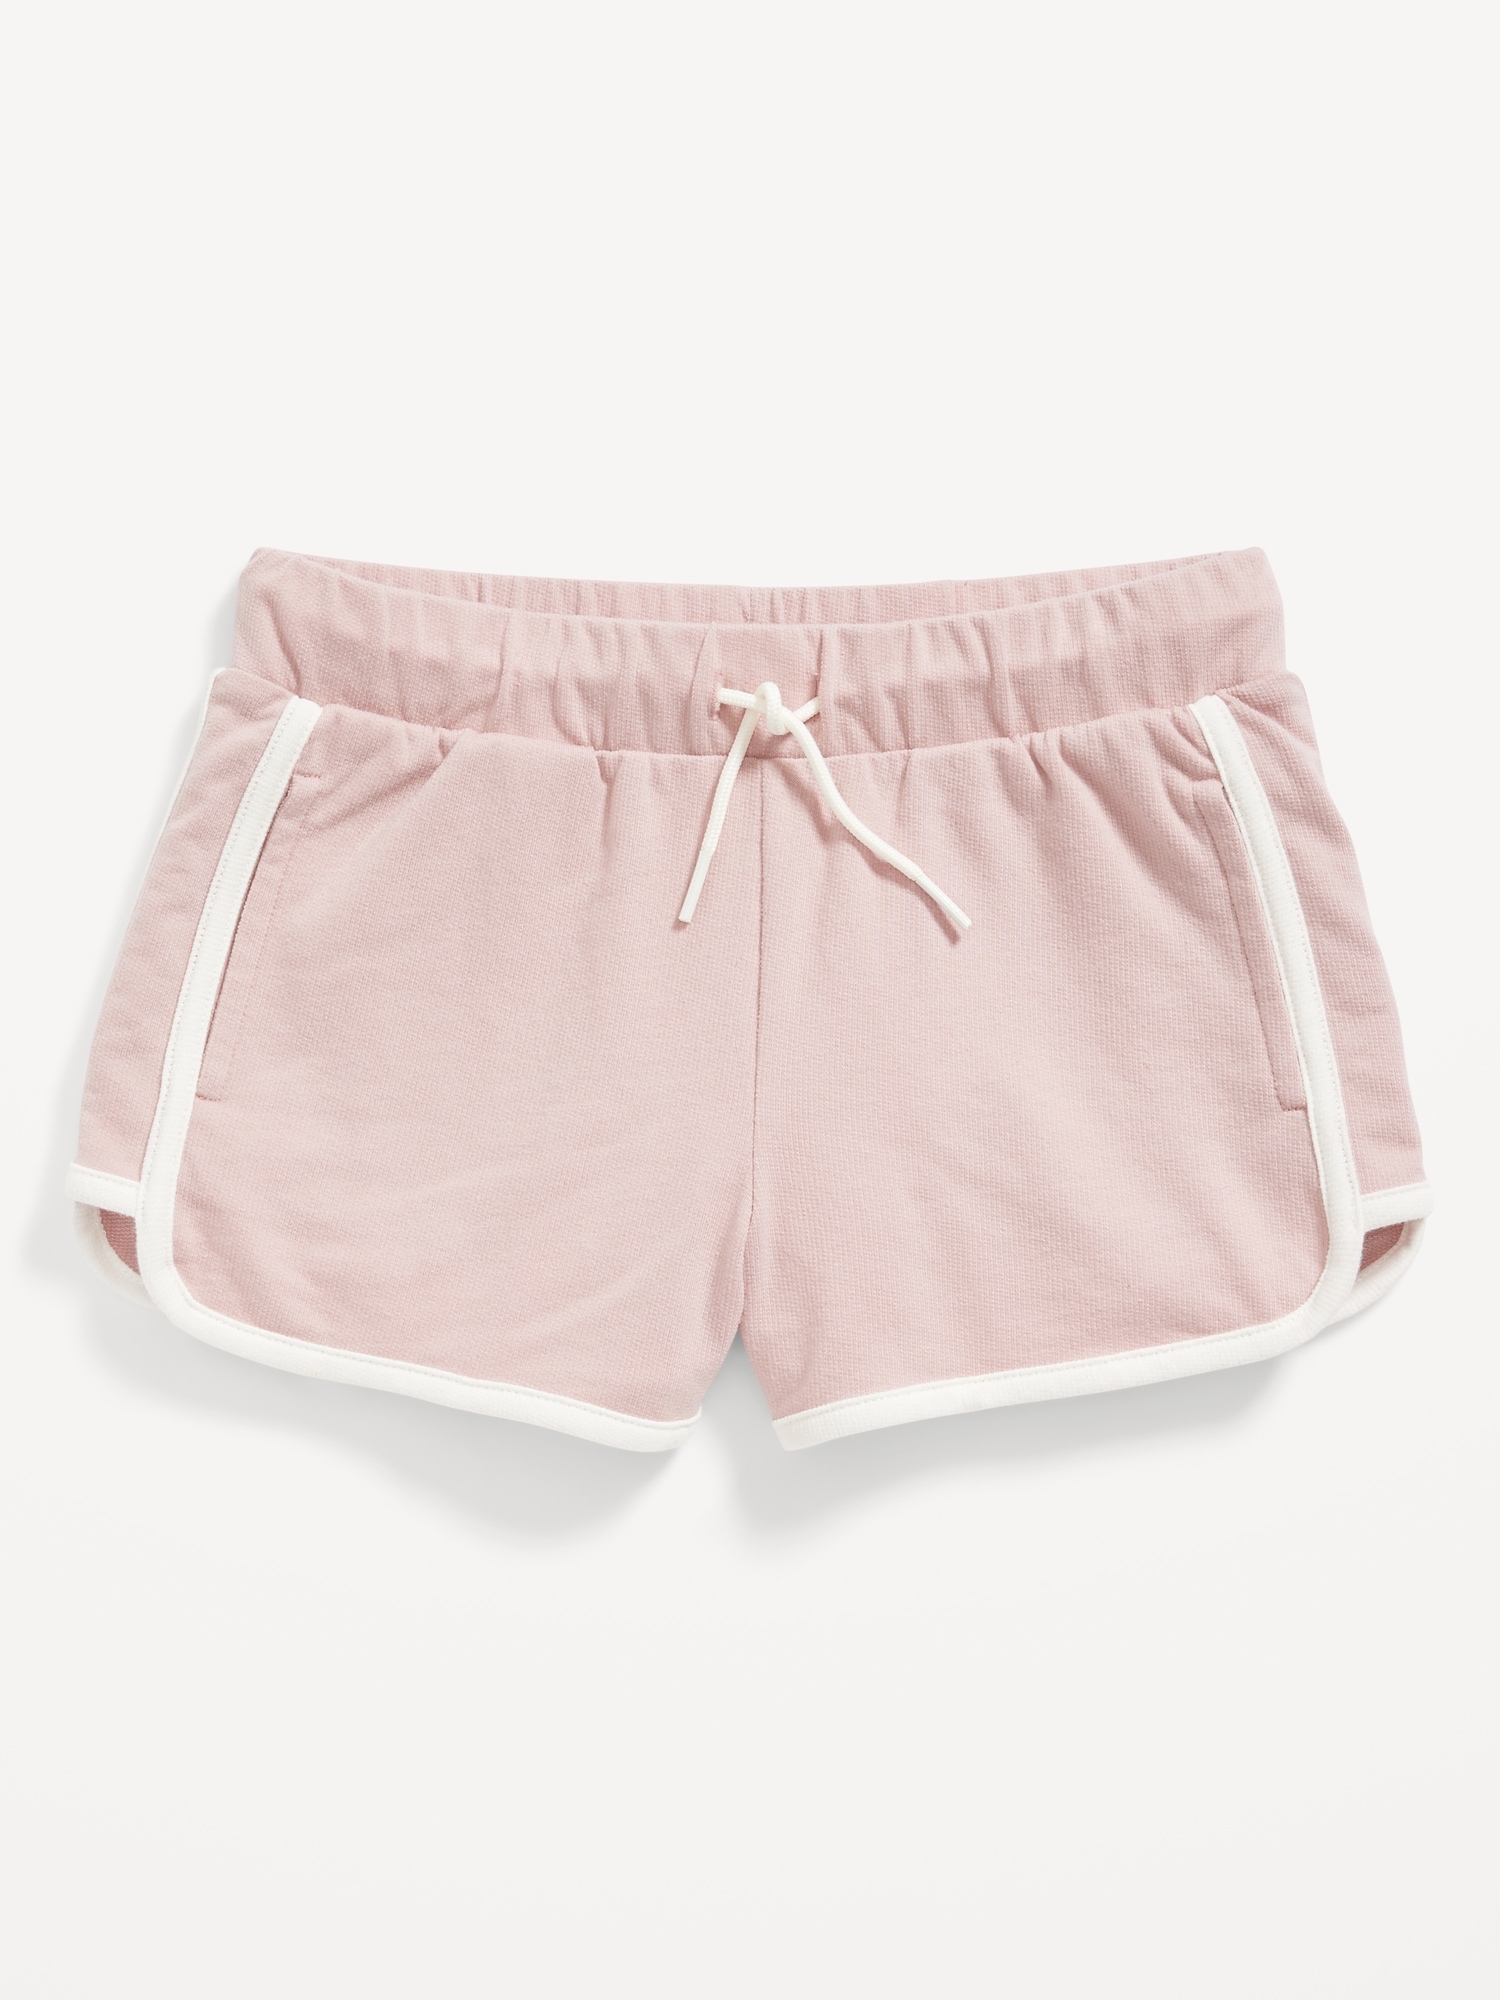 Old Navy French Terry Dolphin-Hem Cheer Shorts for Girls pink. 1